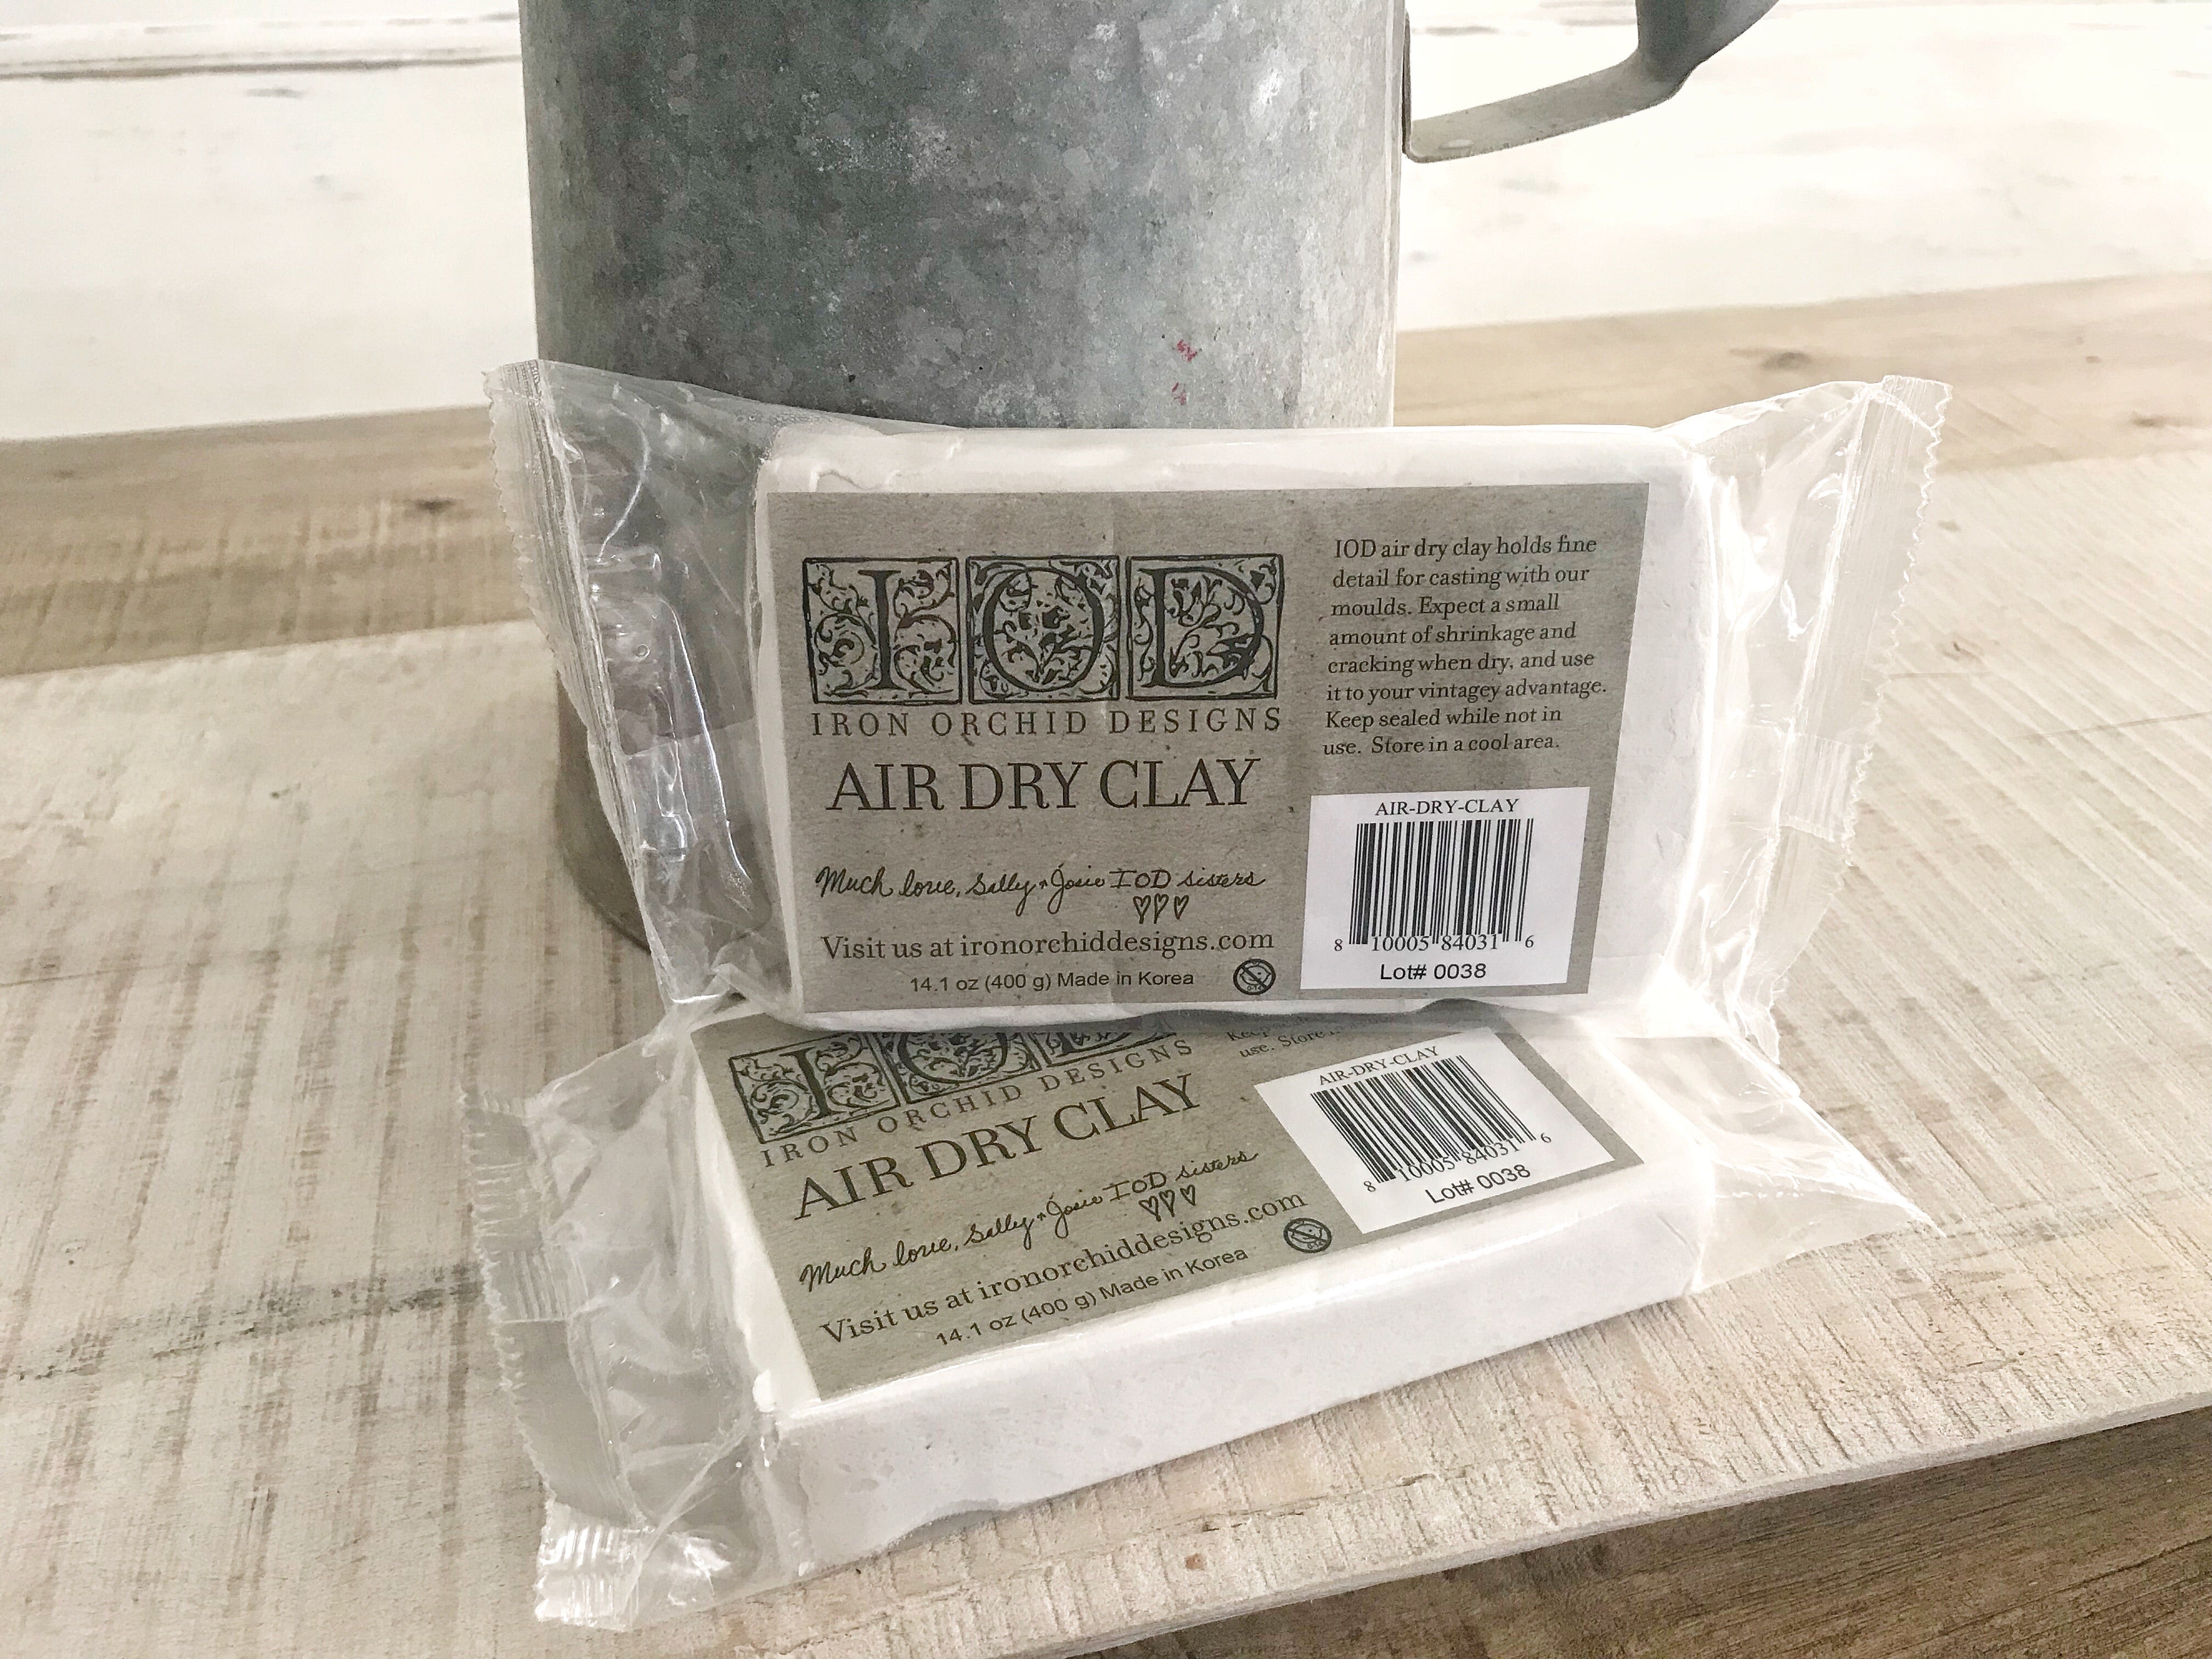 IOD Air Dry Clay, Iron Orchid Designs – My Victorian Heart